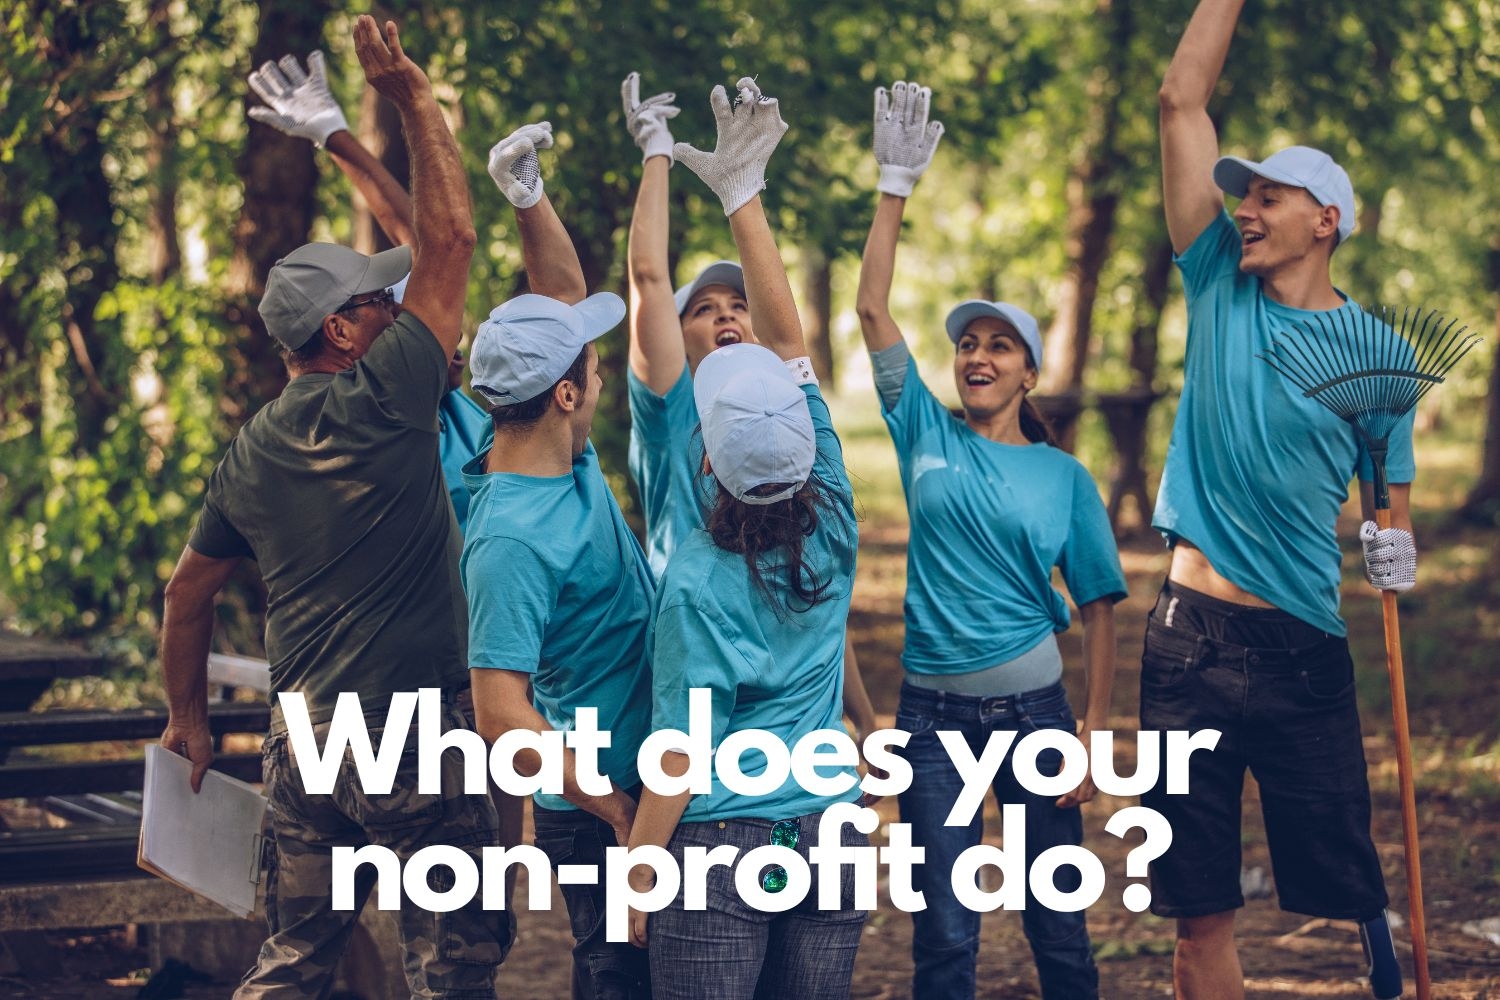 Can you describe what your non-profit does, in ONE sentence?